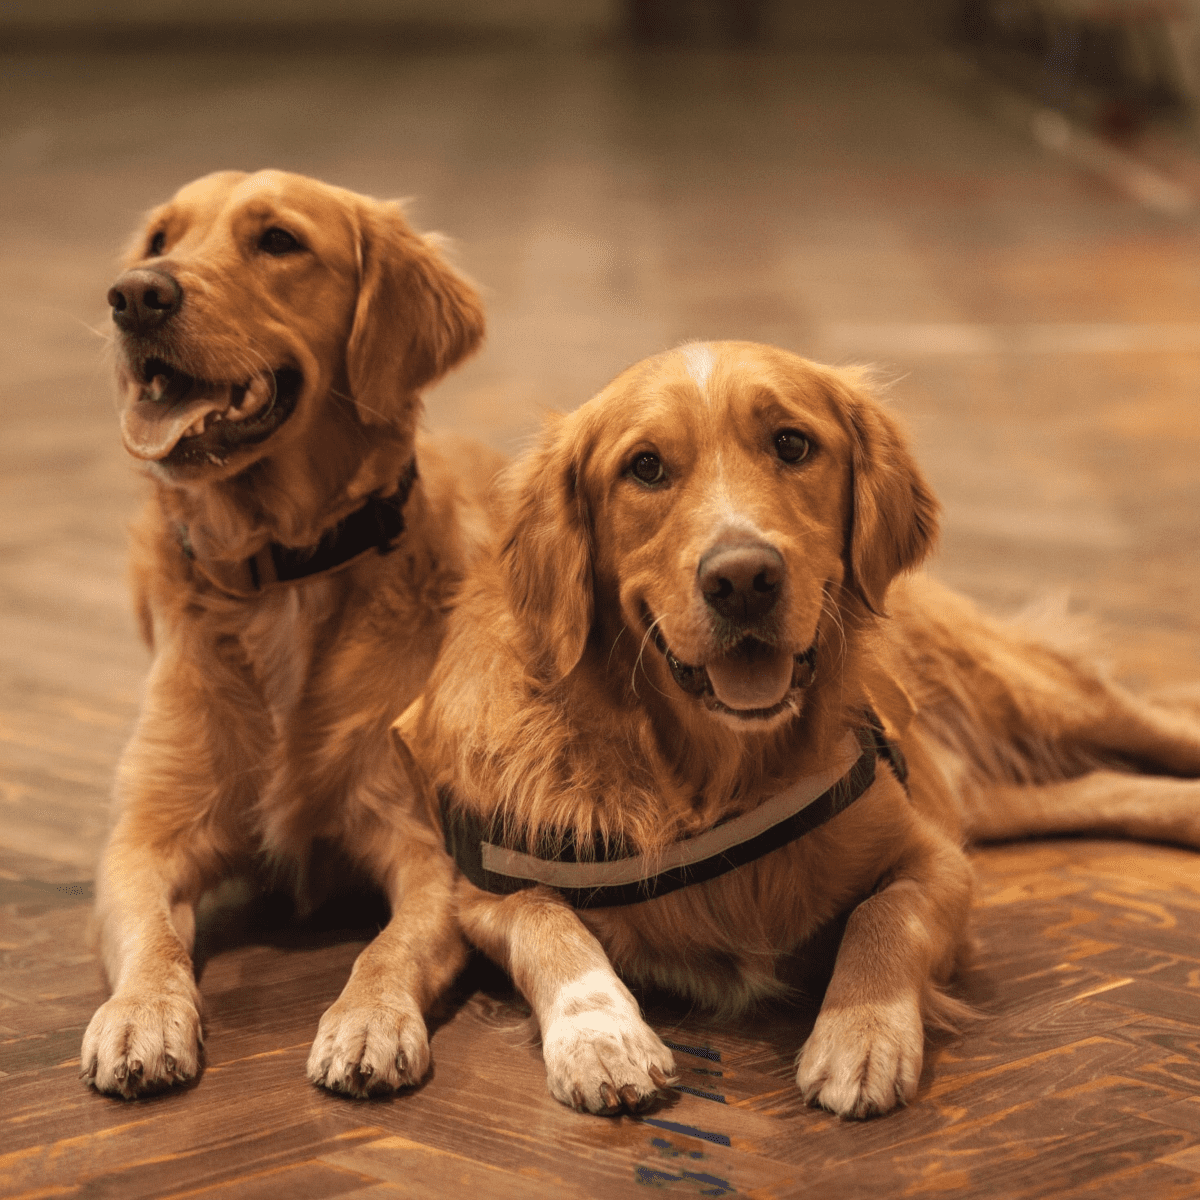 10 Cool Facts About Golden Retrievers